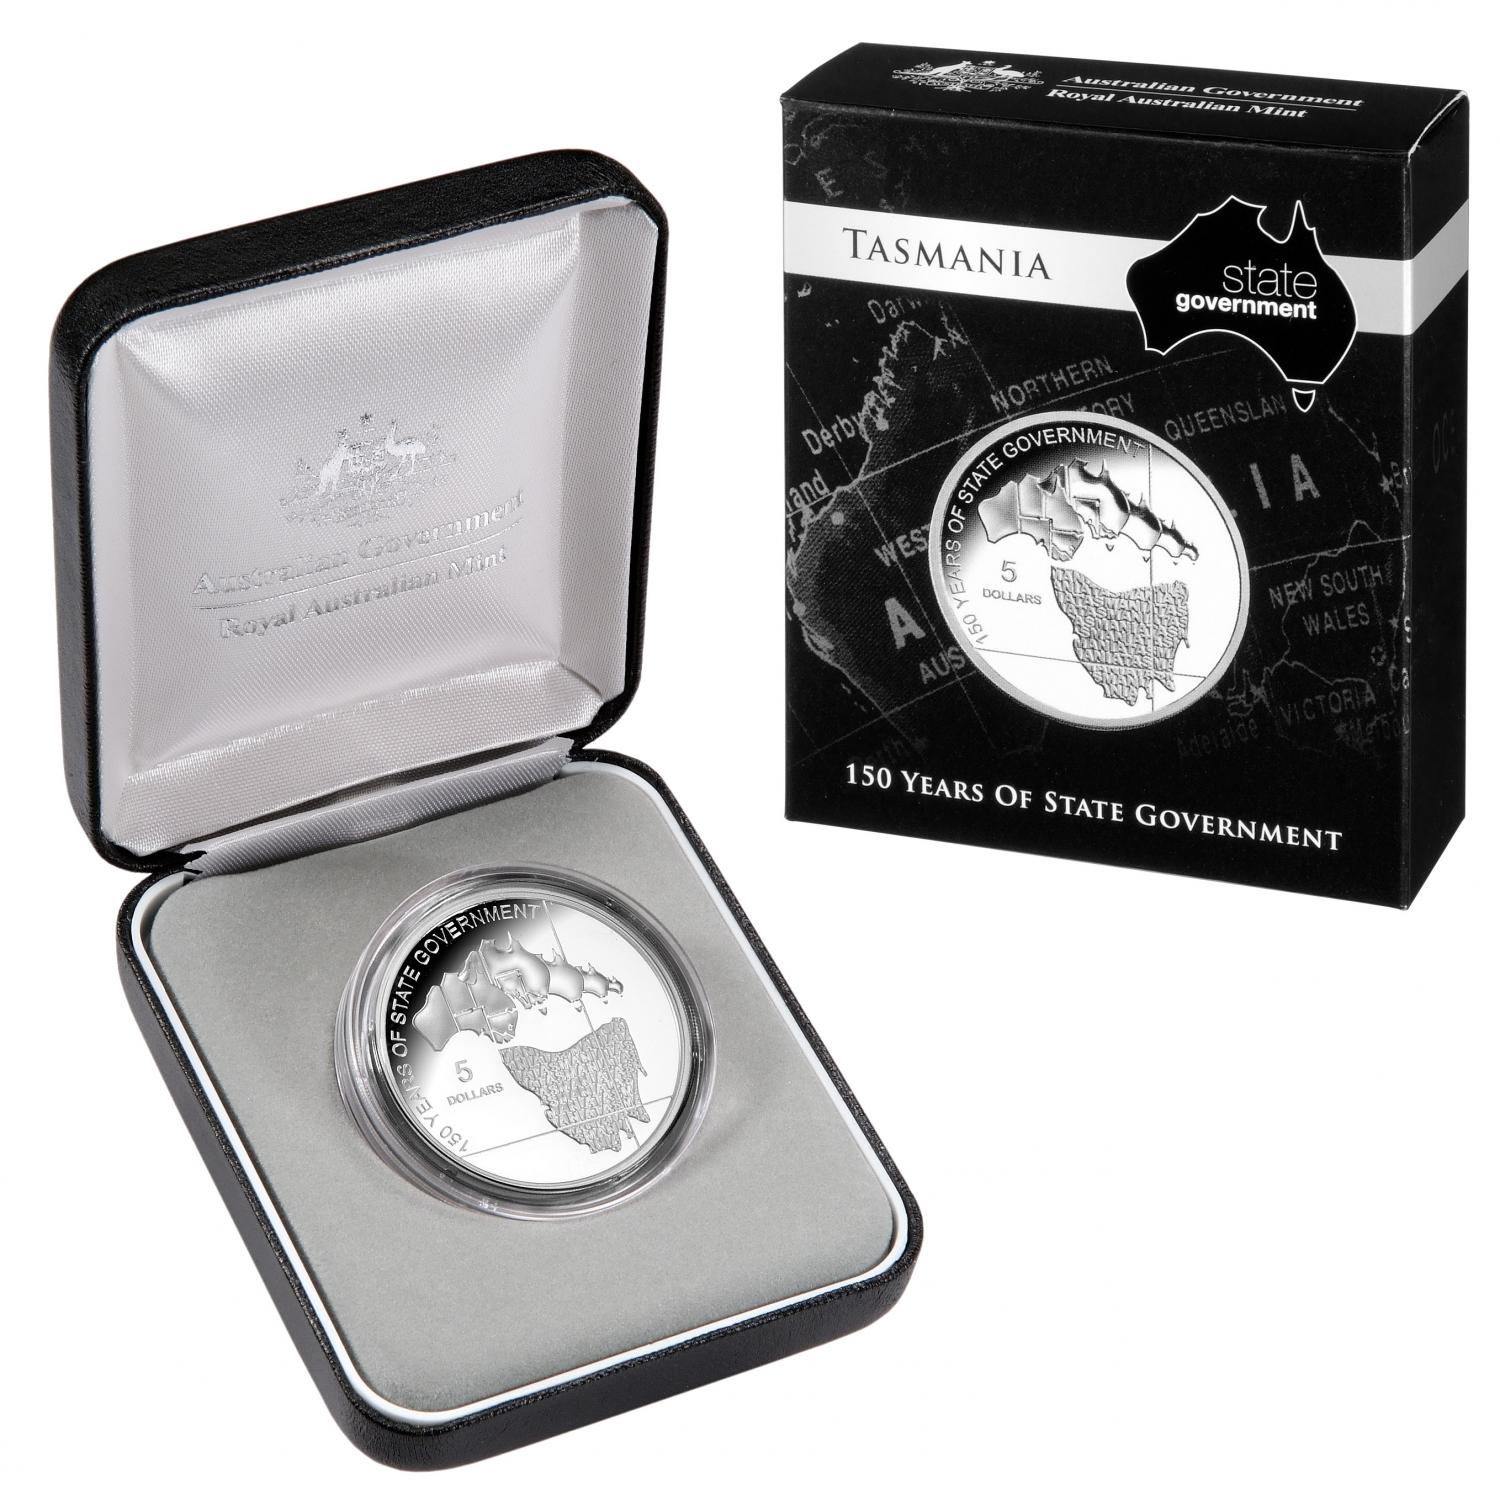 Thumbnail for 2006 $5.00 Silver Proof Tasmania 150 Years of State Government